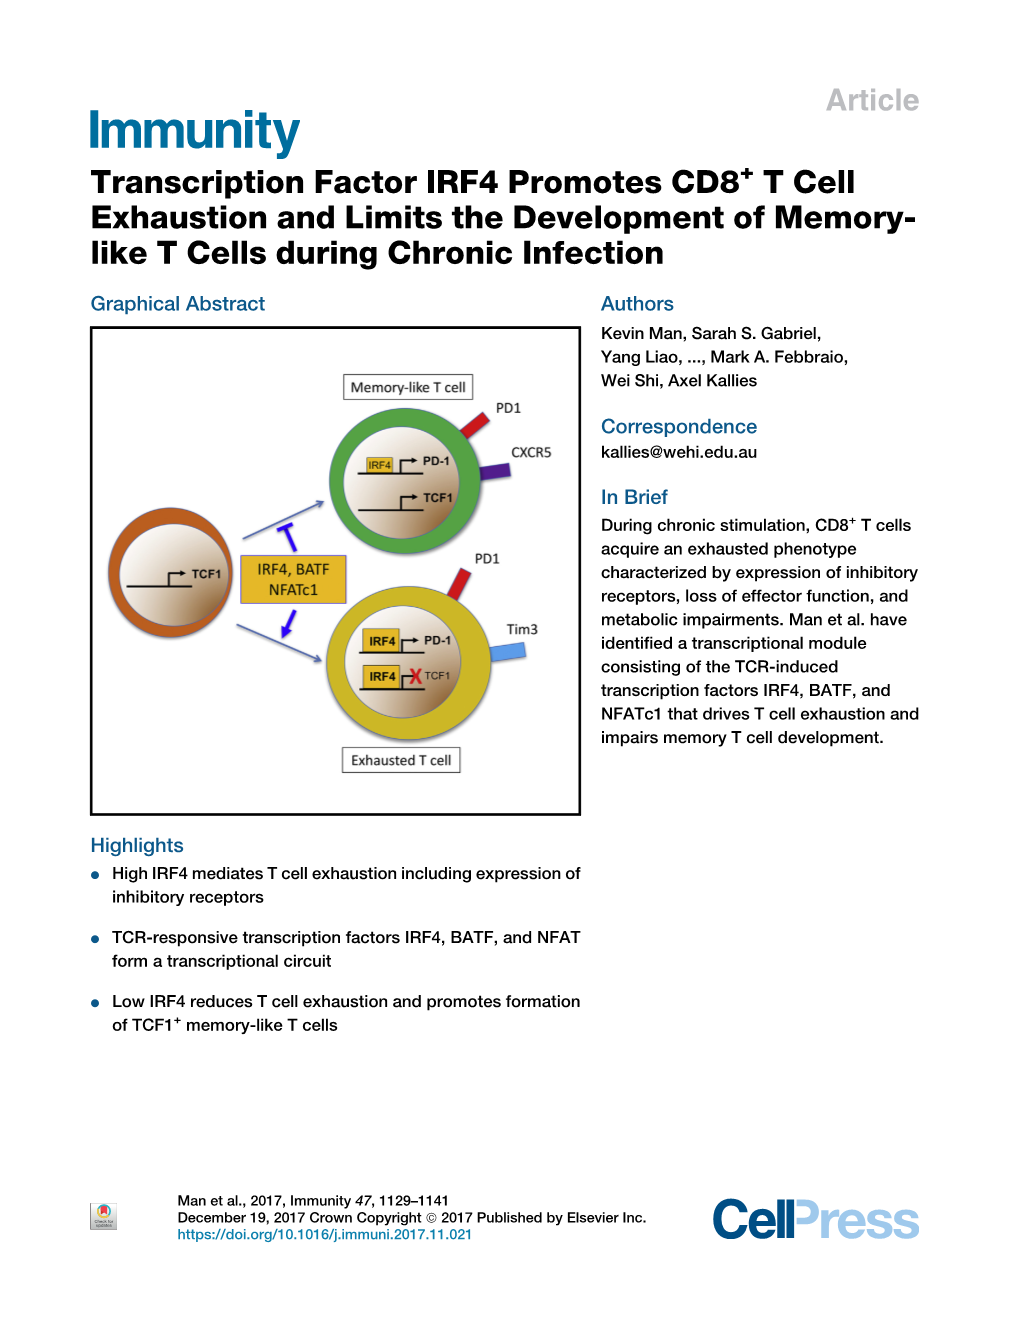 Transcription Factor IRF4 Promotes CD8 T Cell Exhaustion and Limits